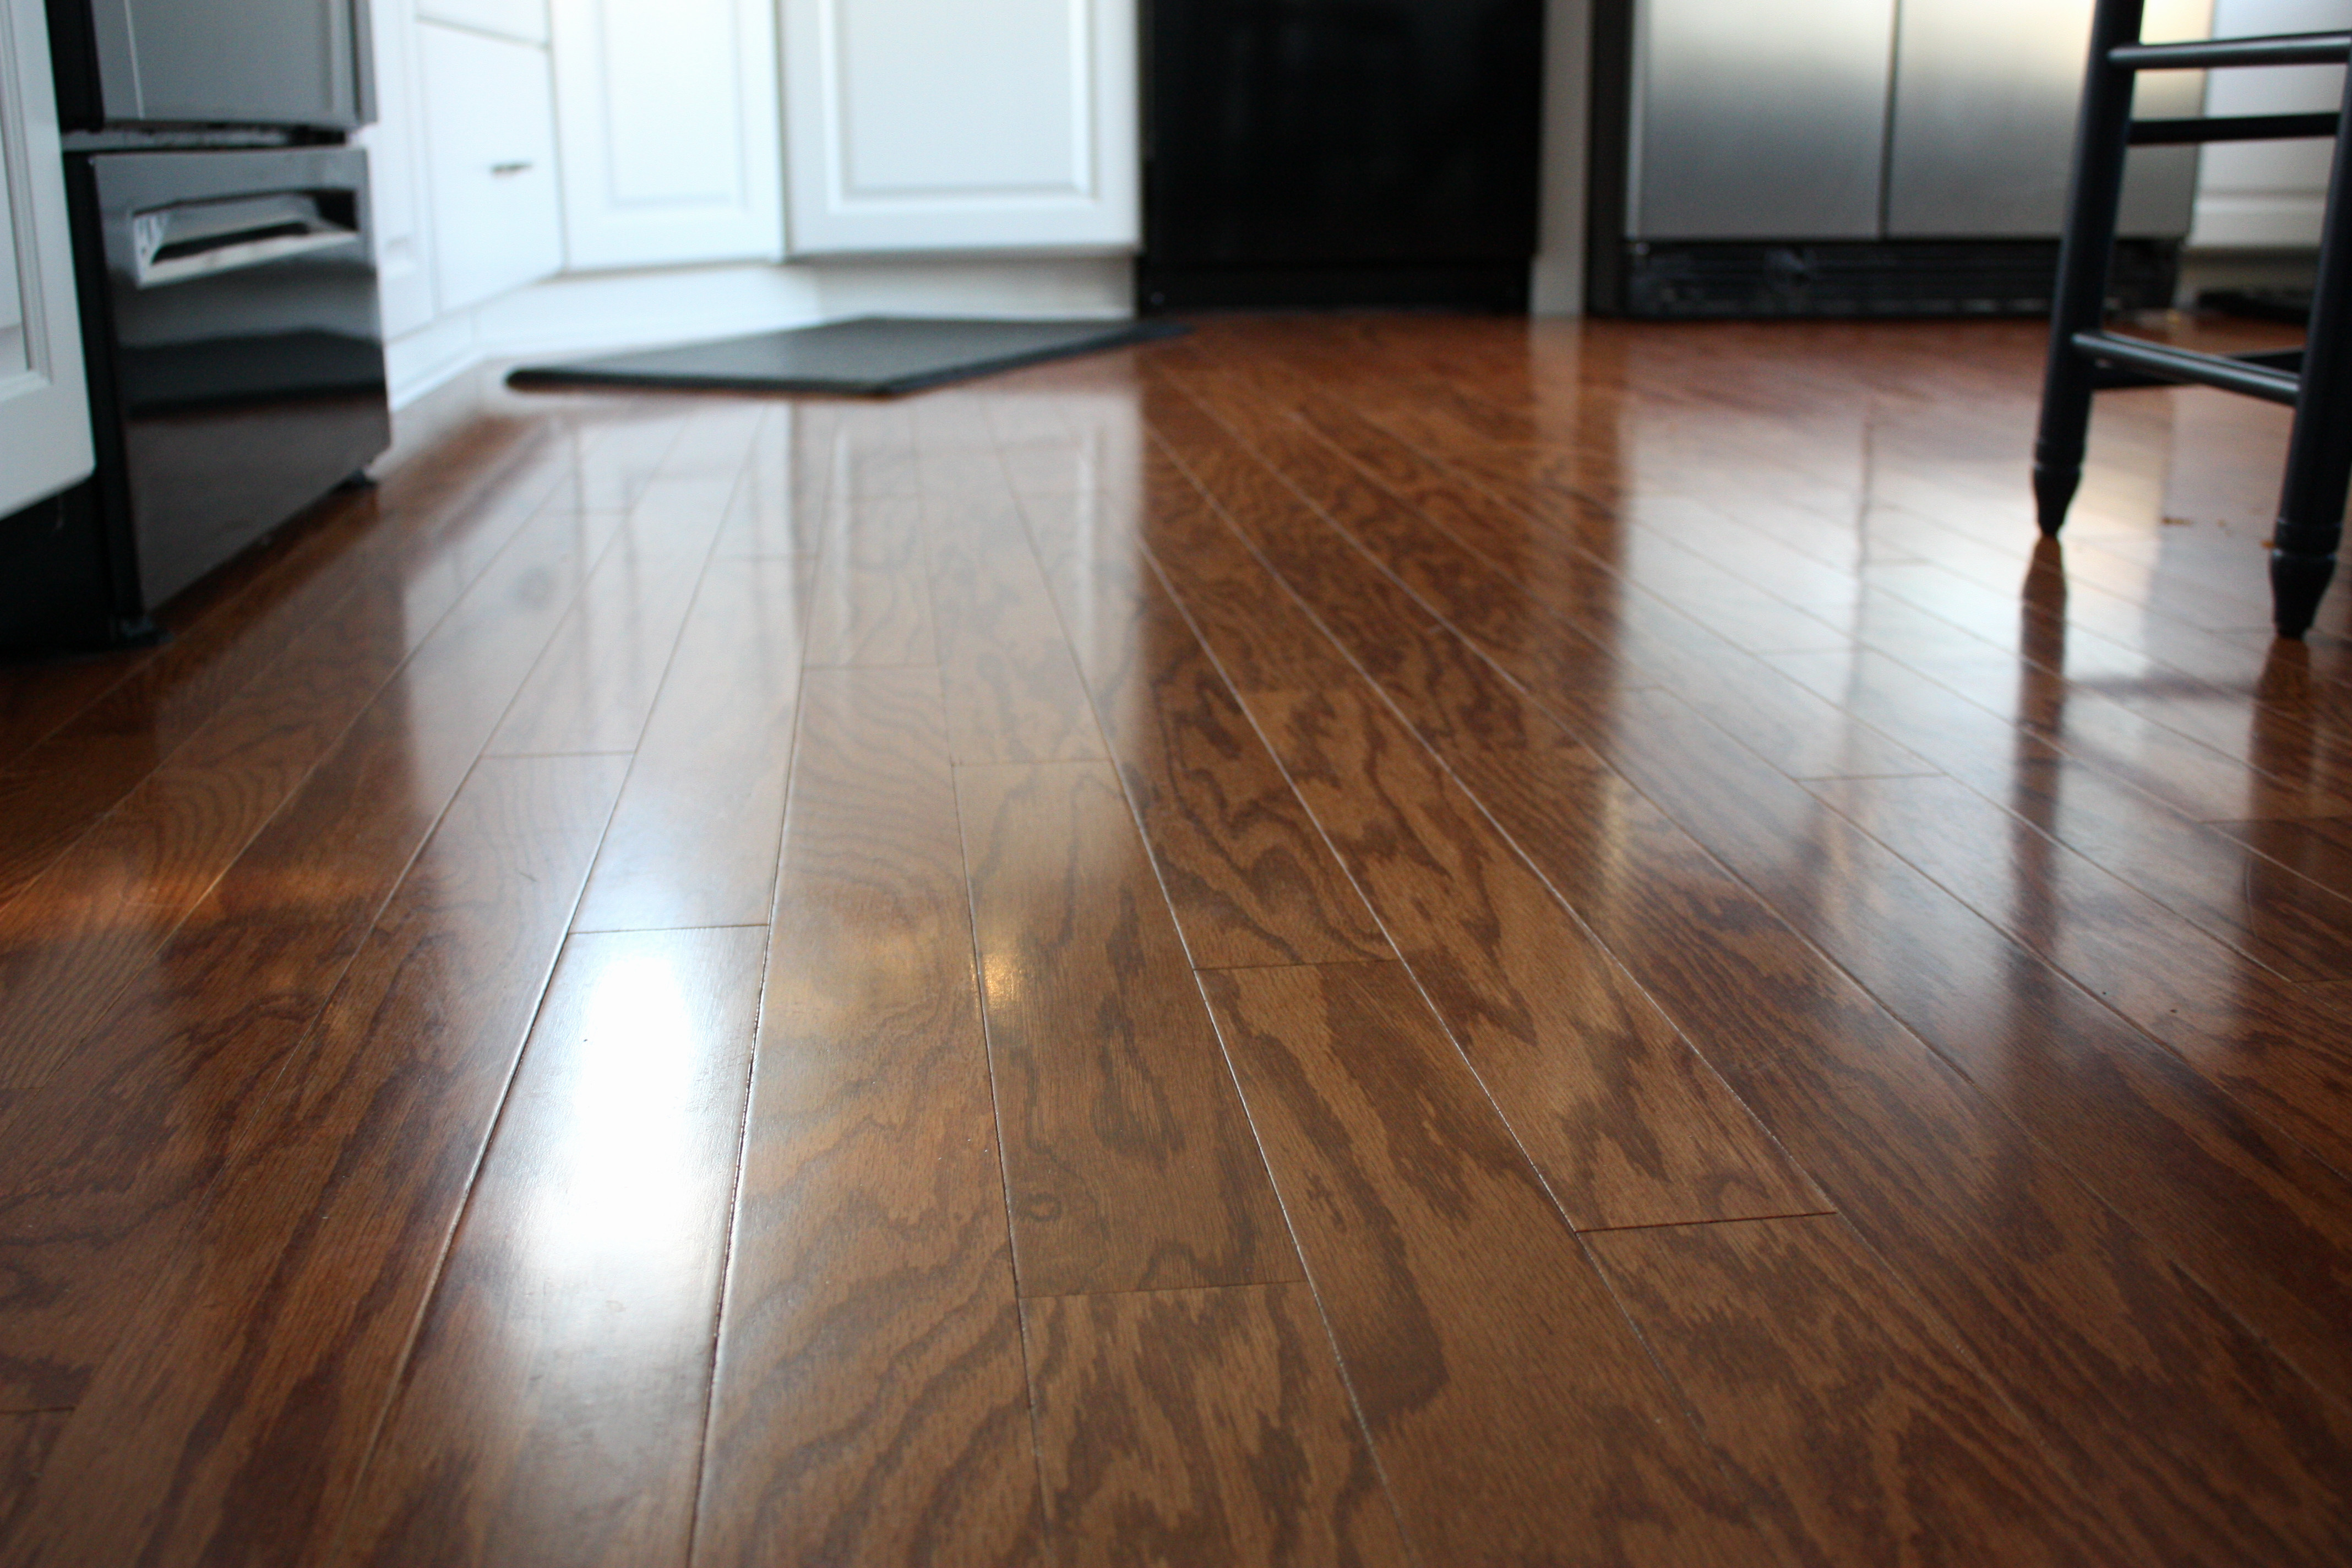 26 Ideal Hardwood Floor Pricing Guide 2024 free download hardwood floor pricing guide of the wood maker page 6 wood wallpaper intended for floor floorod cleaning hardwood carpet lake forest il rare image ideas of wood floor steam cleaner